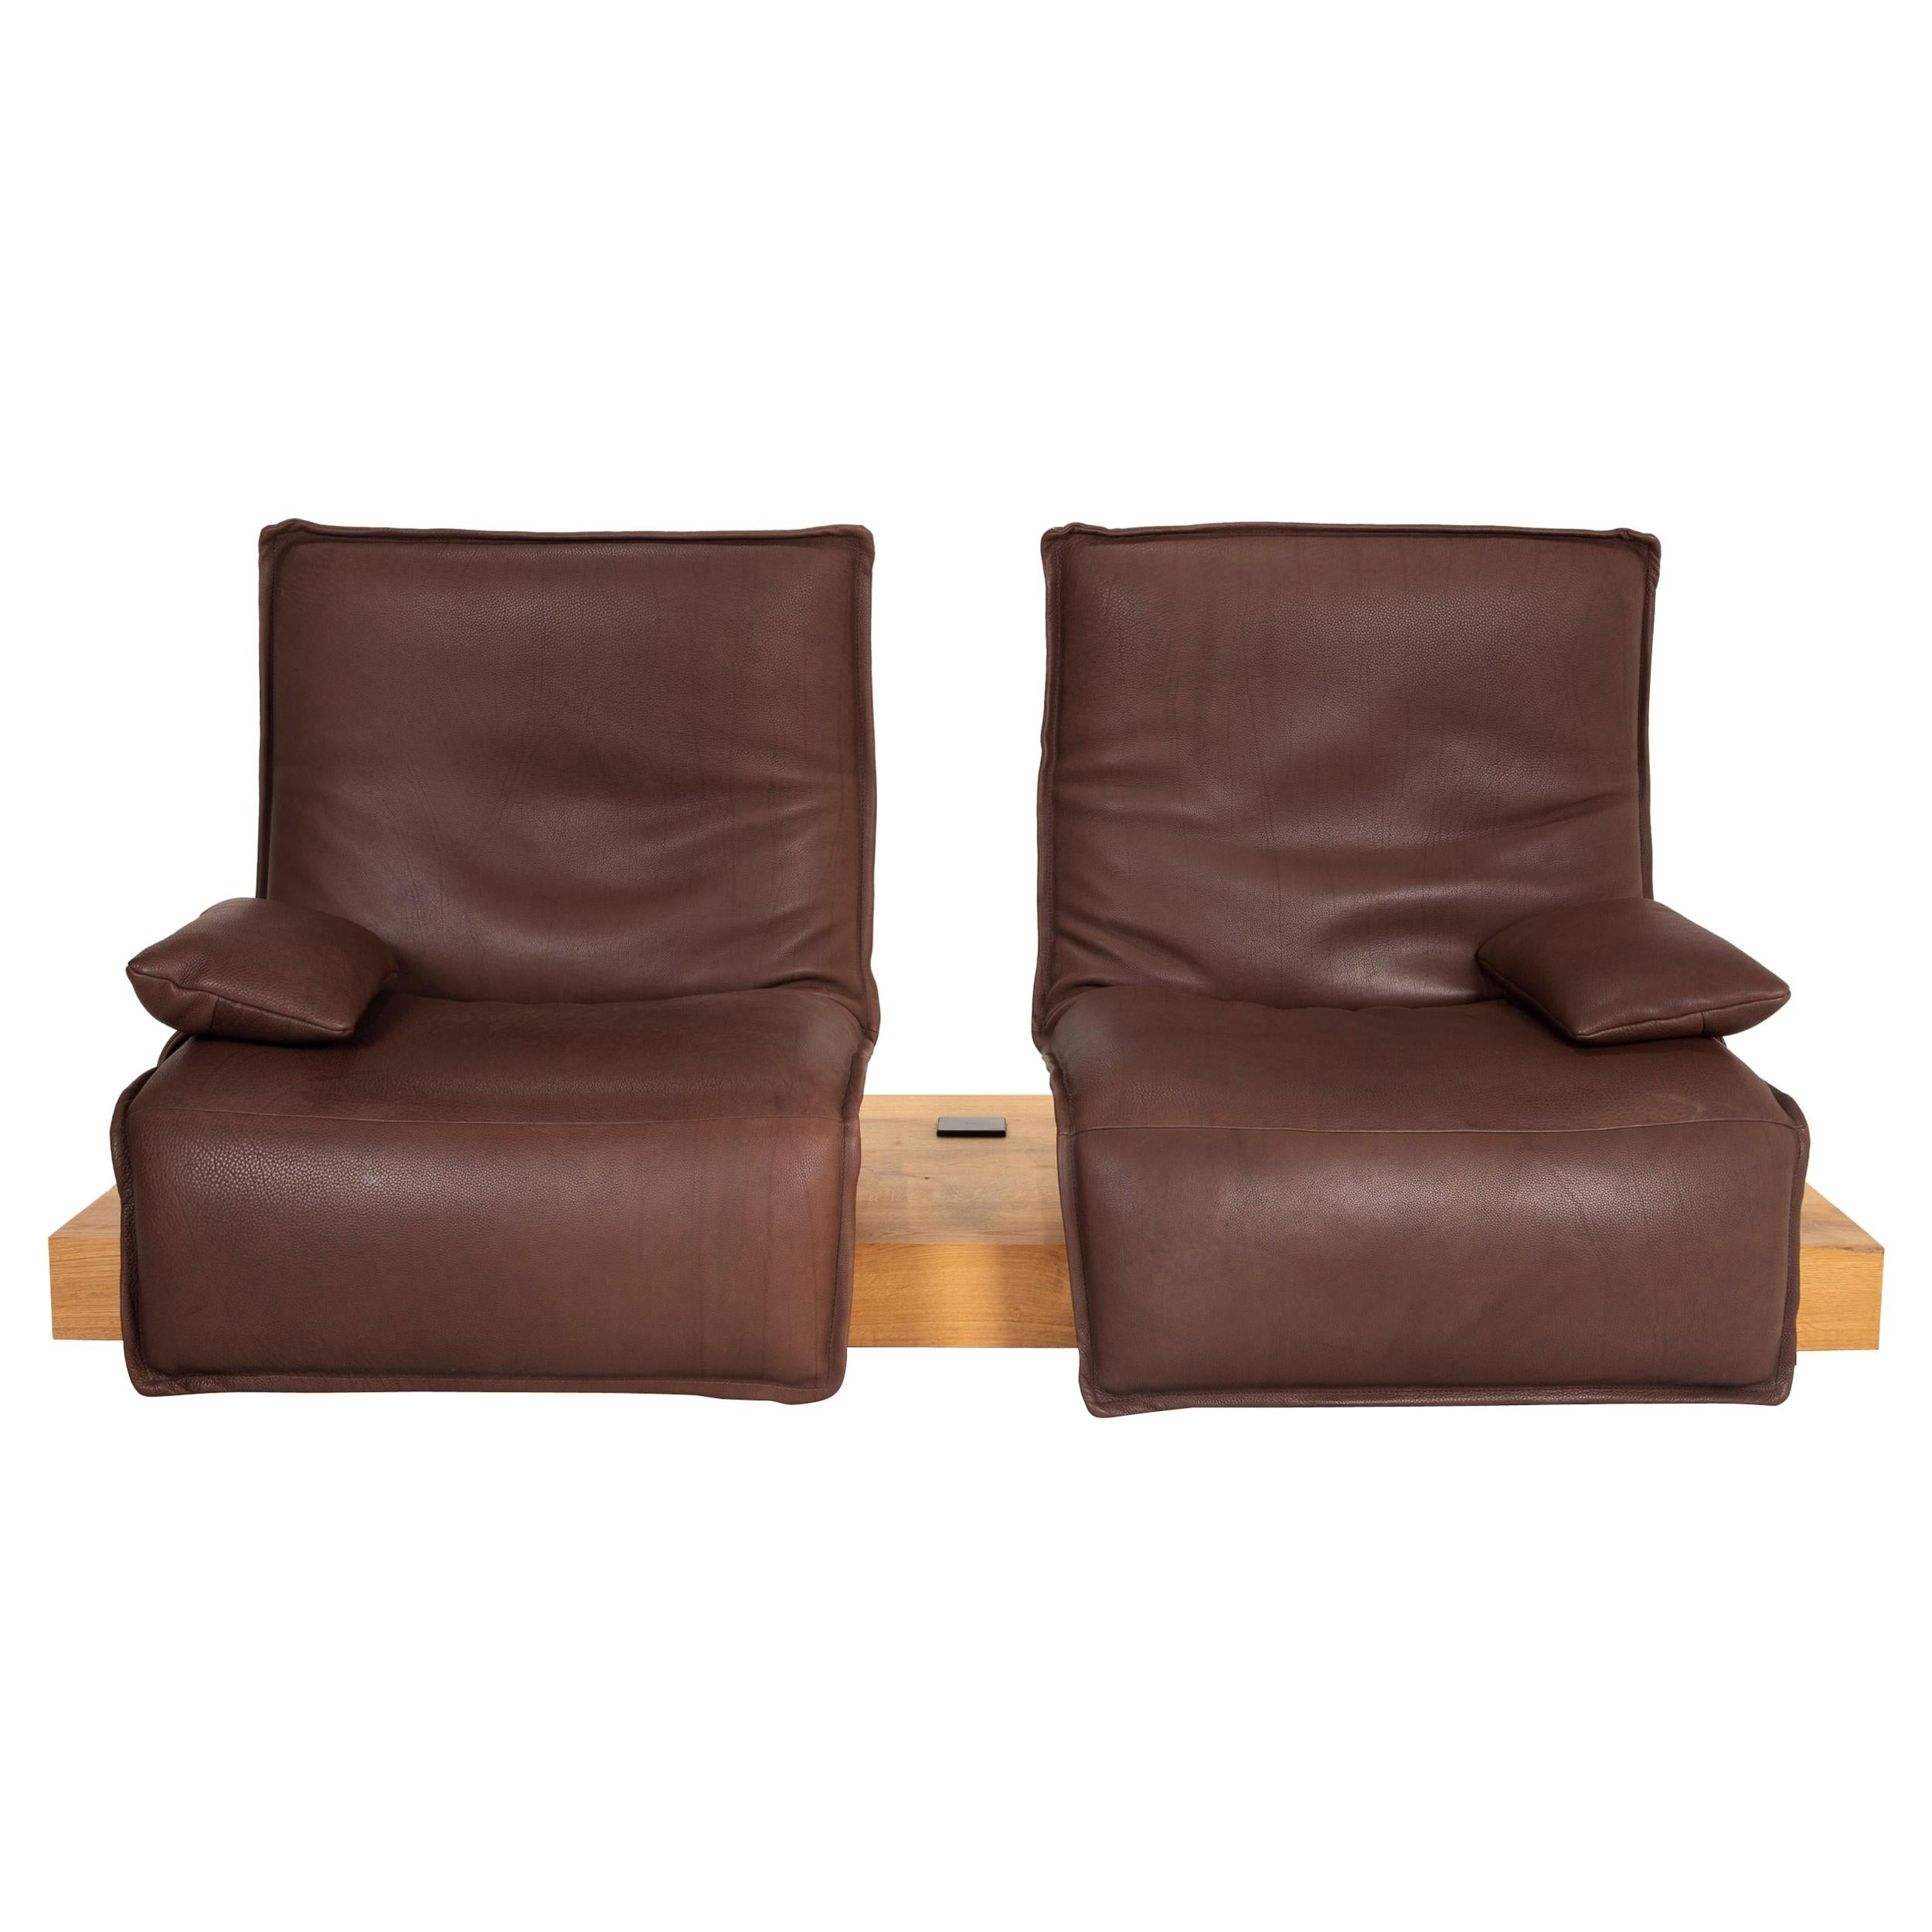 Koinor Epos 3 Leather Sofa Brown Two-Seater Wood Couch with Electrical Function